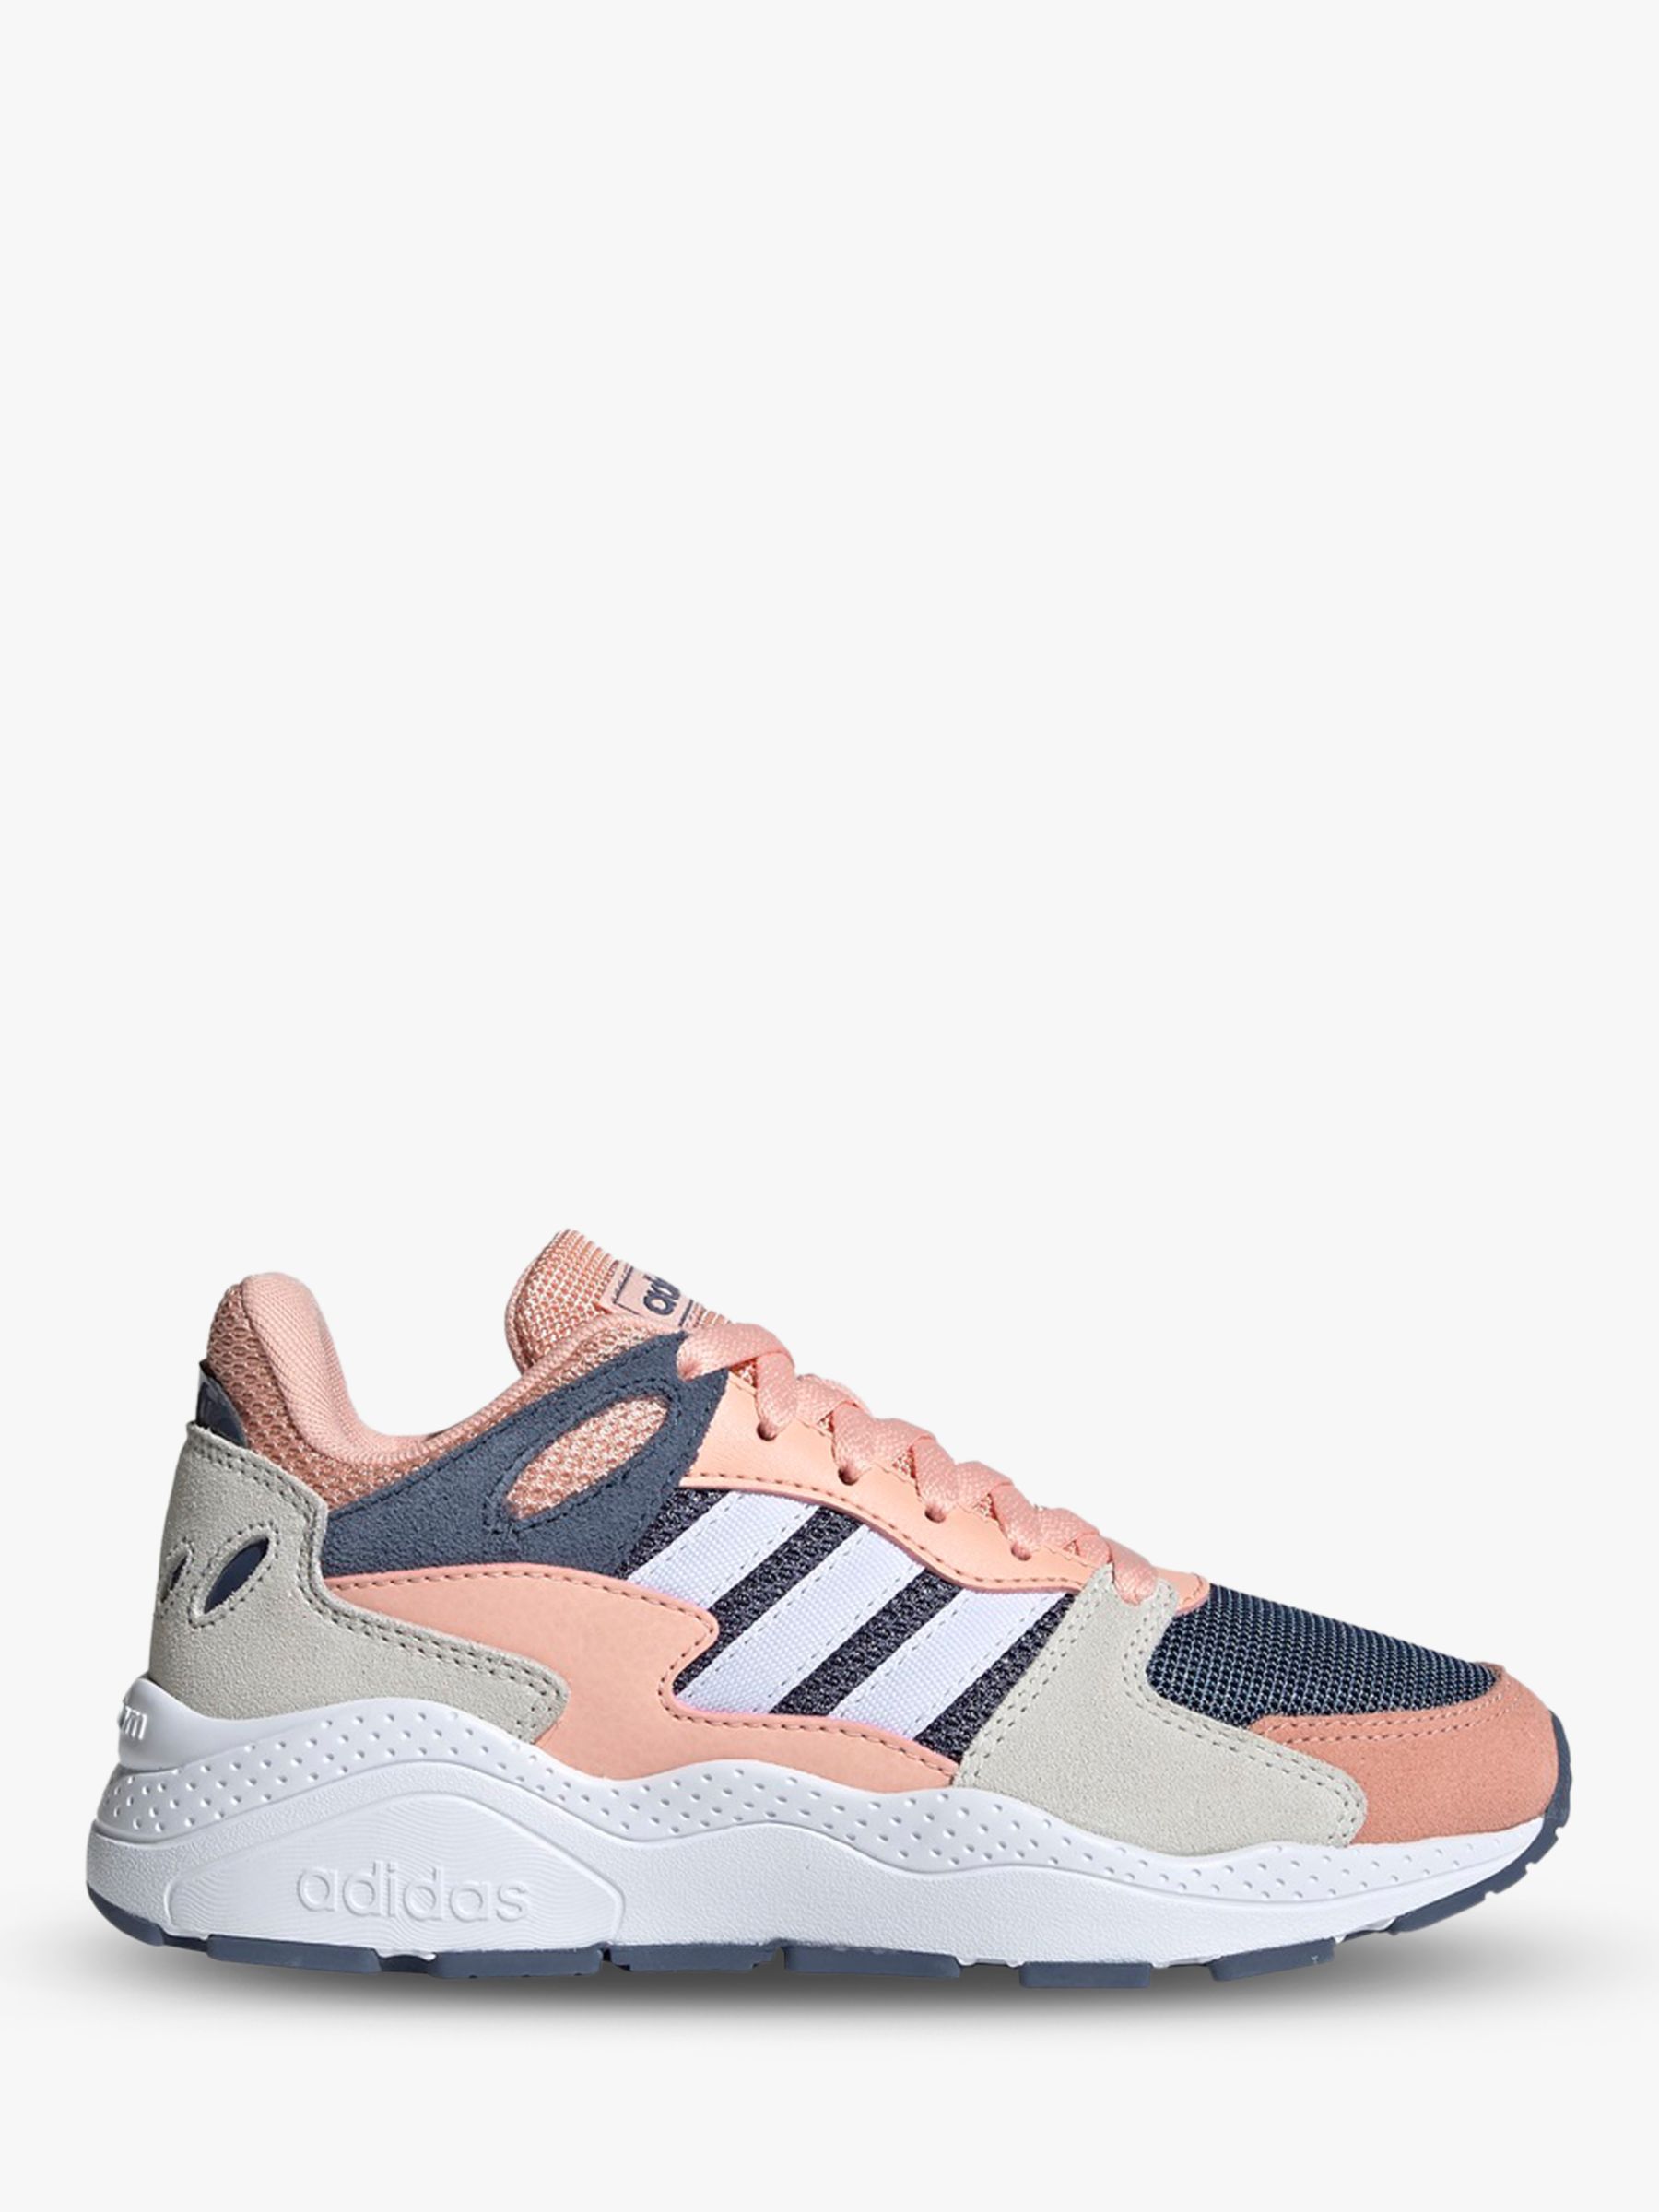 adidas crazychaos trainers